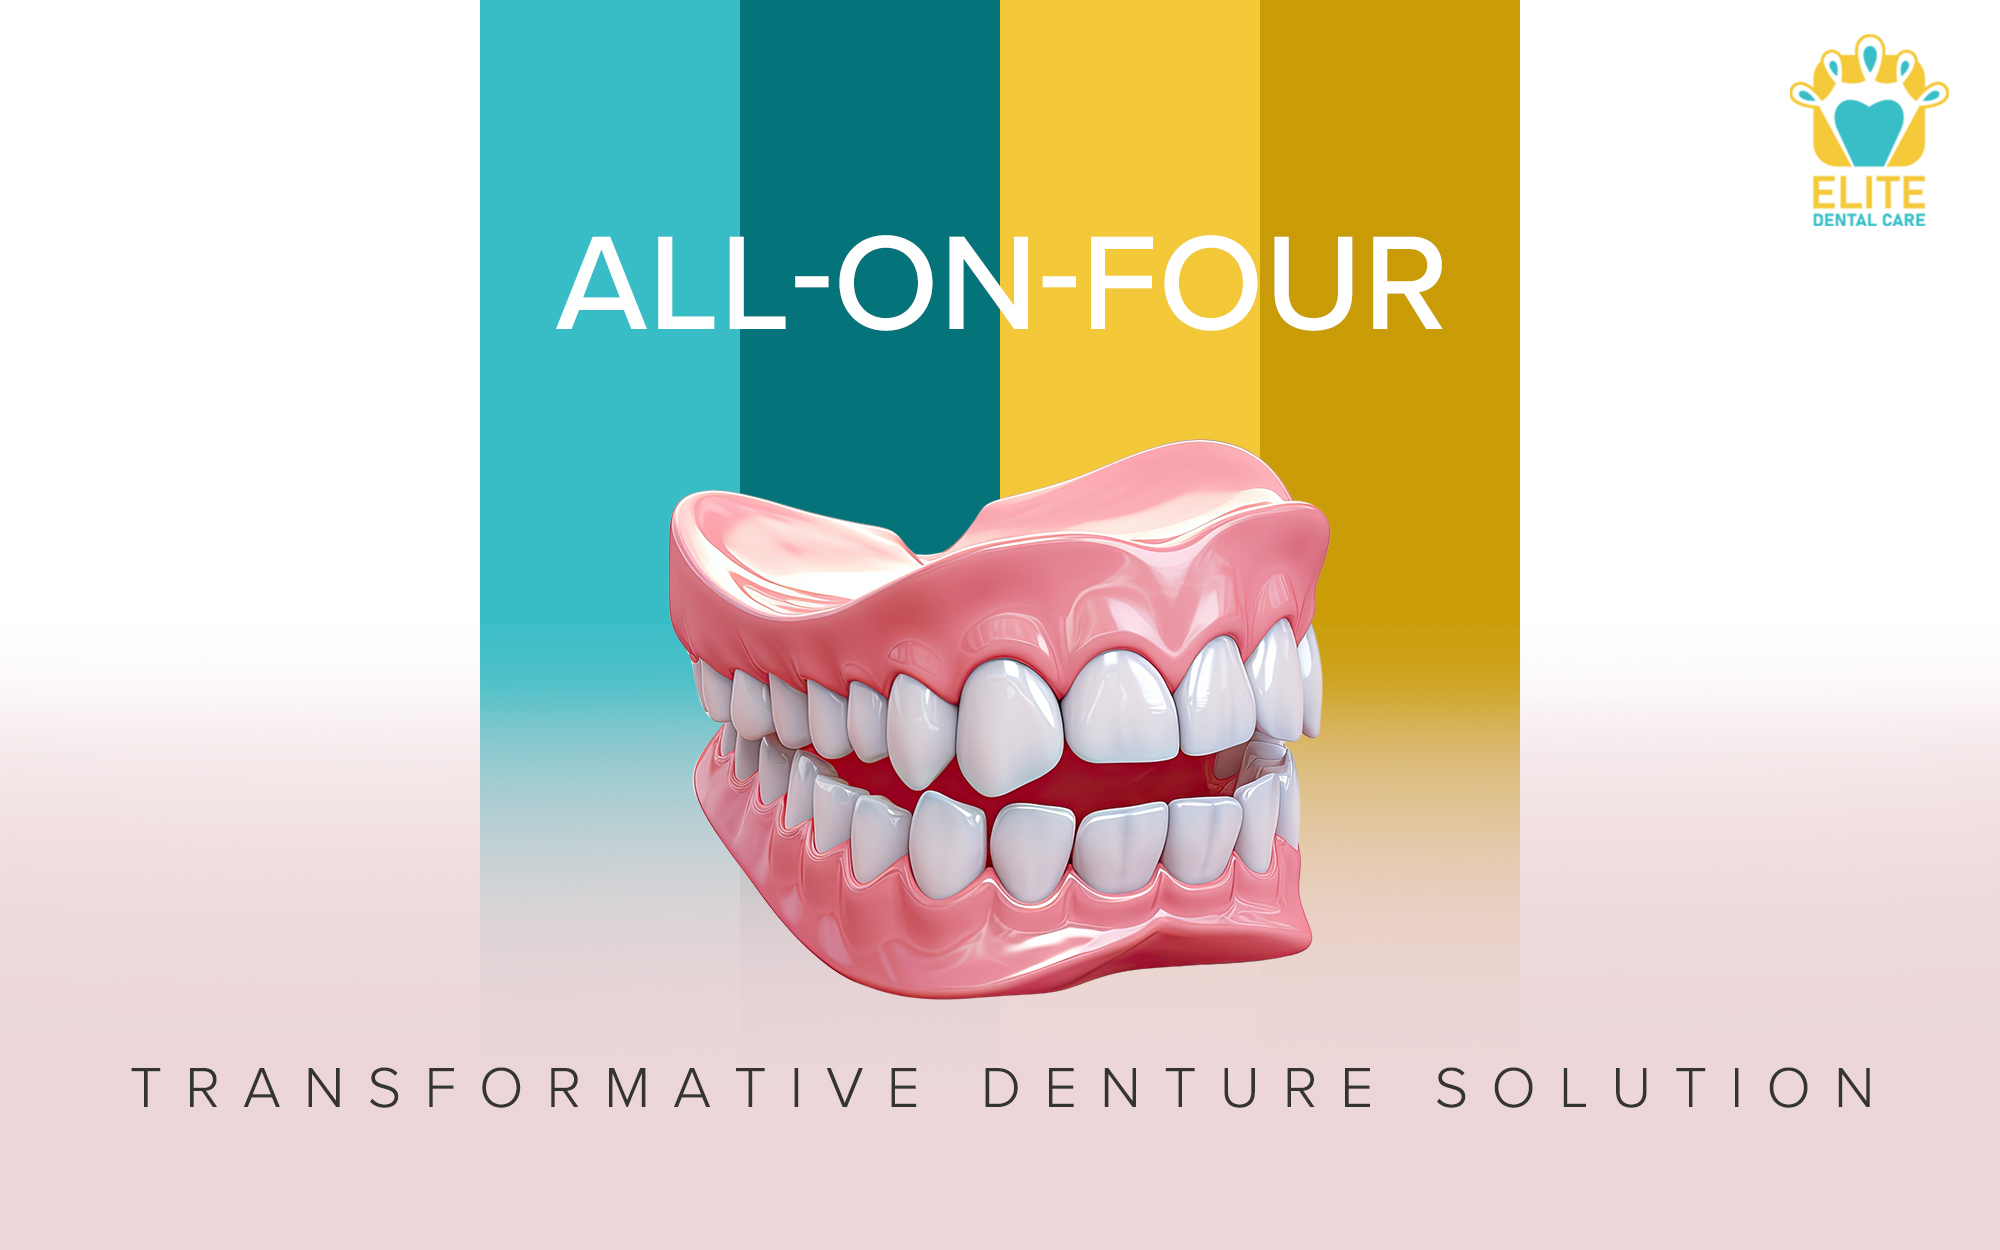 All-On-Four: Transformative Denture Solution